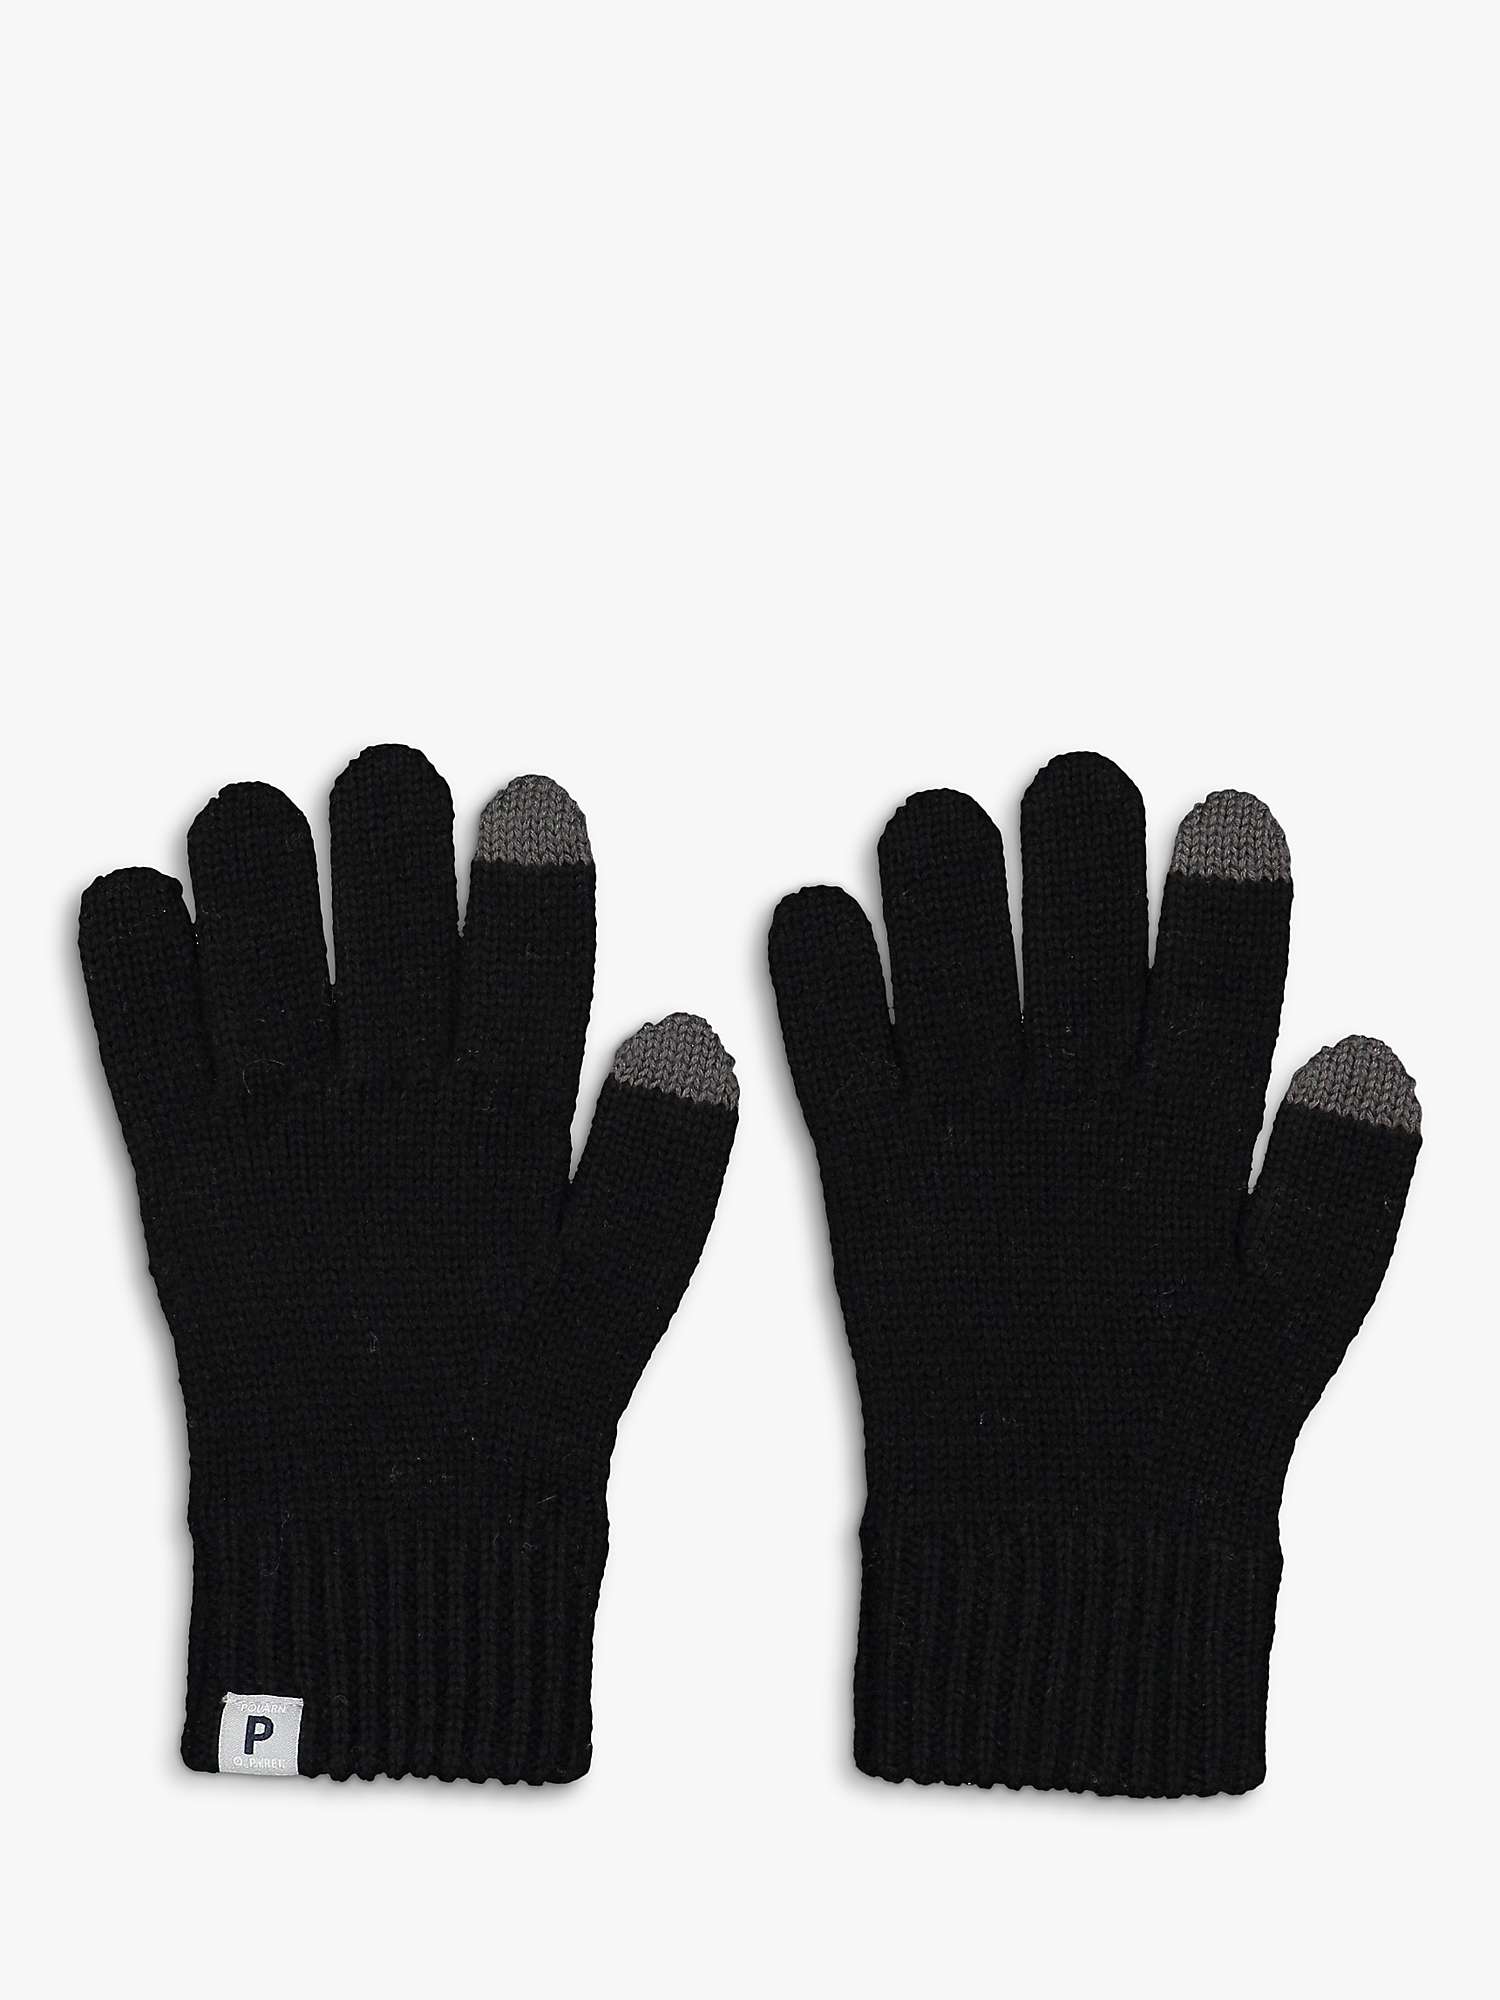 Buy Polarn O. Pyret Kids' Wool Touch Gloves, Black Online at johnlewis.com